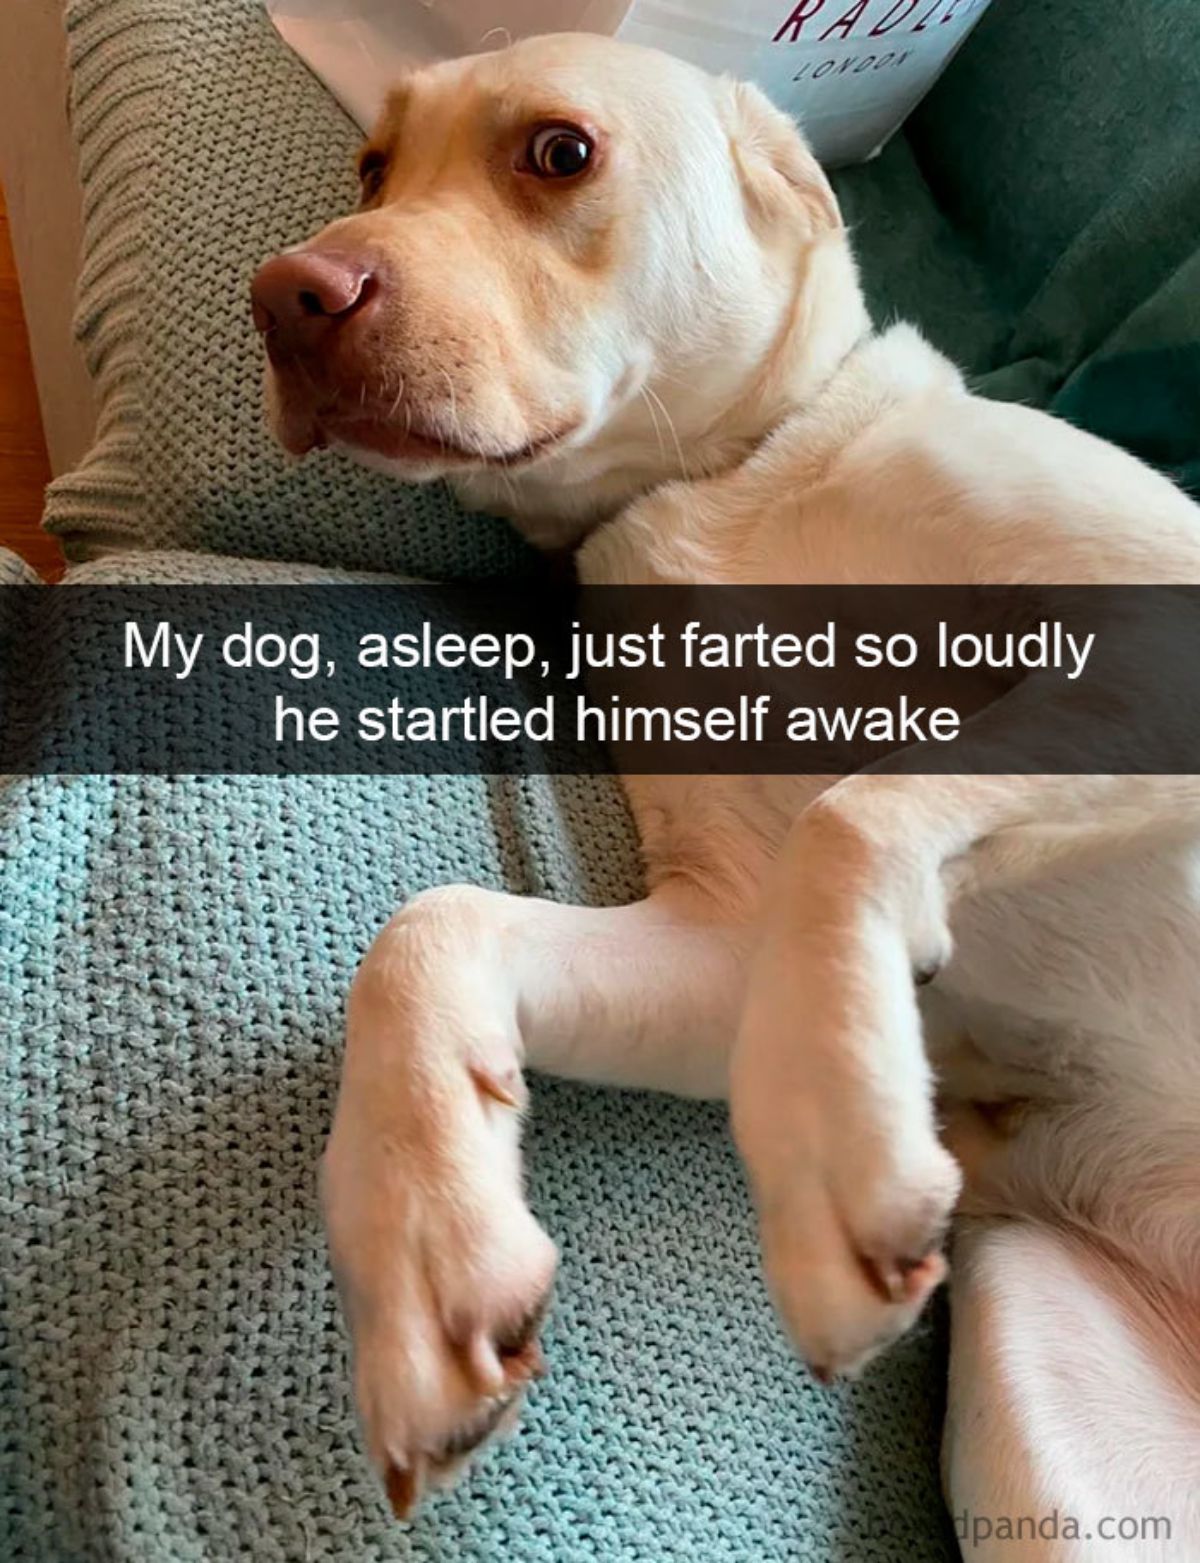 yellow labrador retriever laying on a blue blanket looking startled with a caption saying my dog, asleep, just farted so loudly he startled himself awake